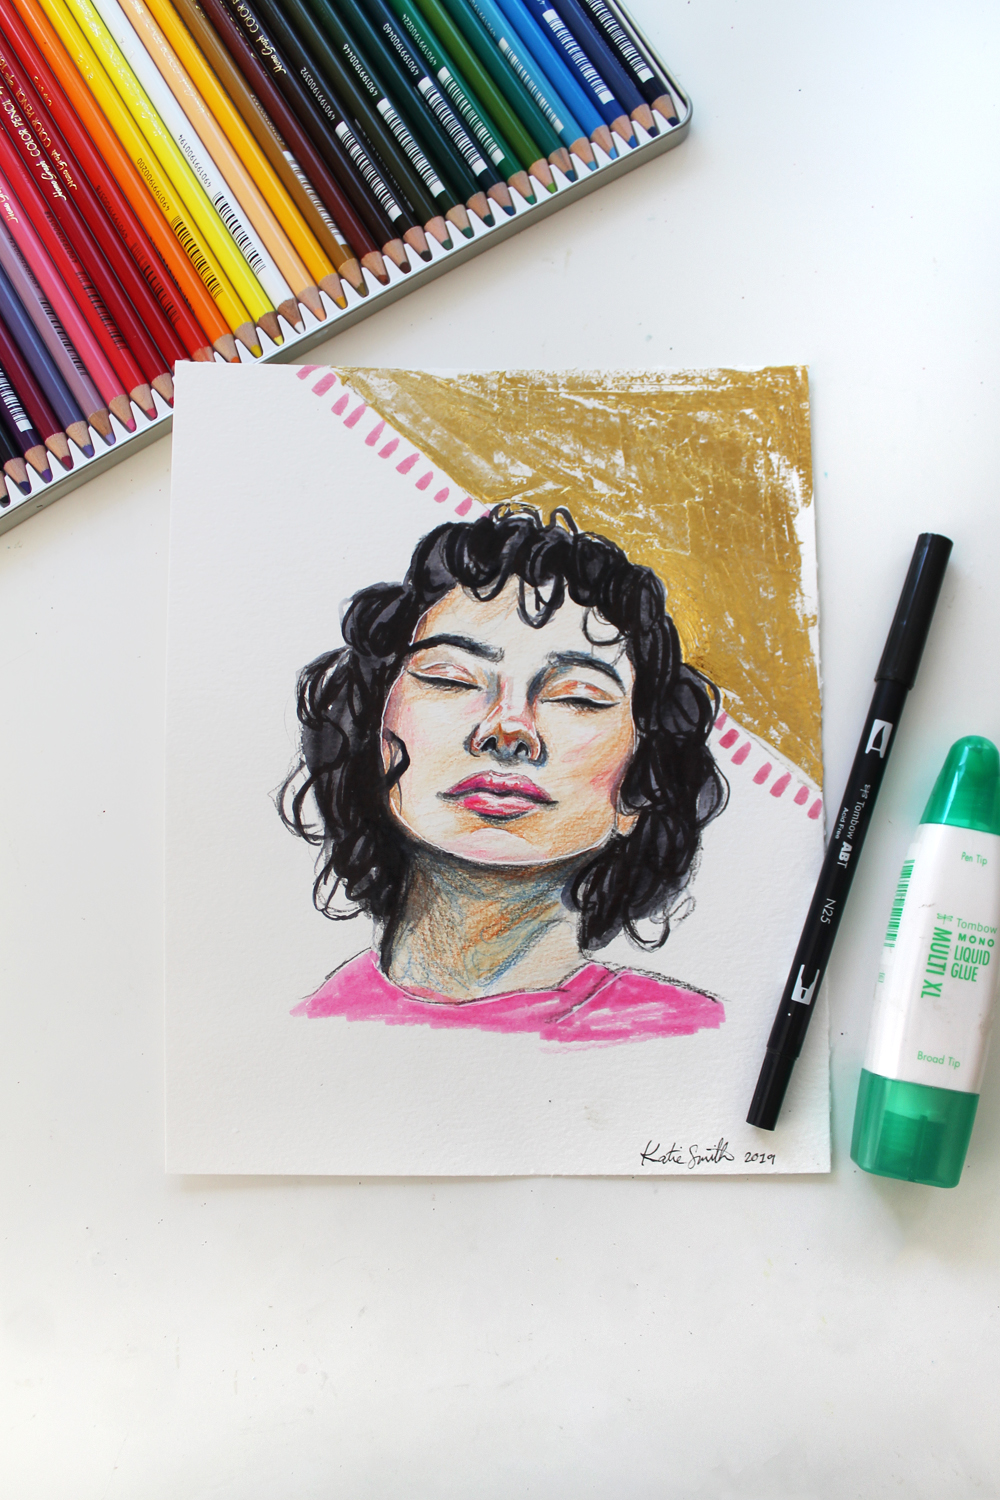 When to Color with colored Pencil and When to Color with a Pen